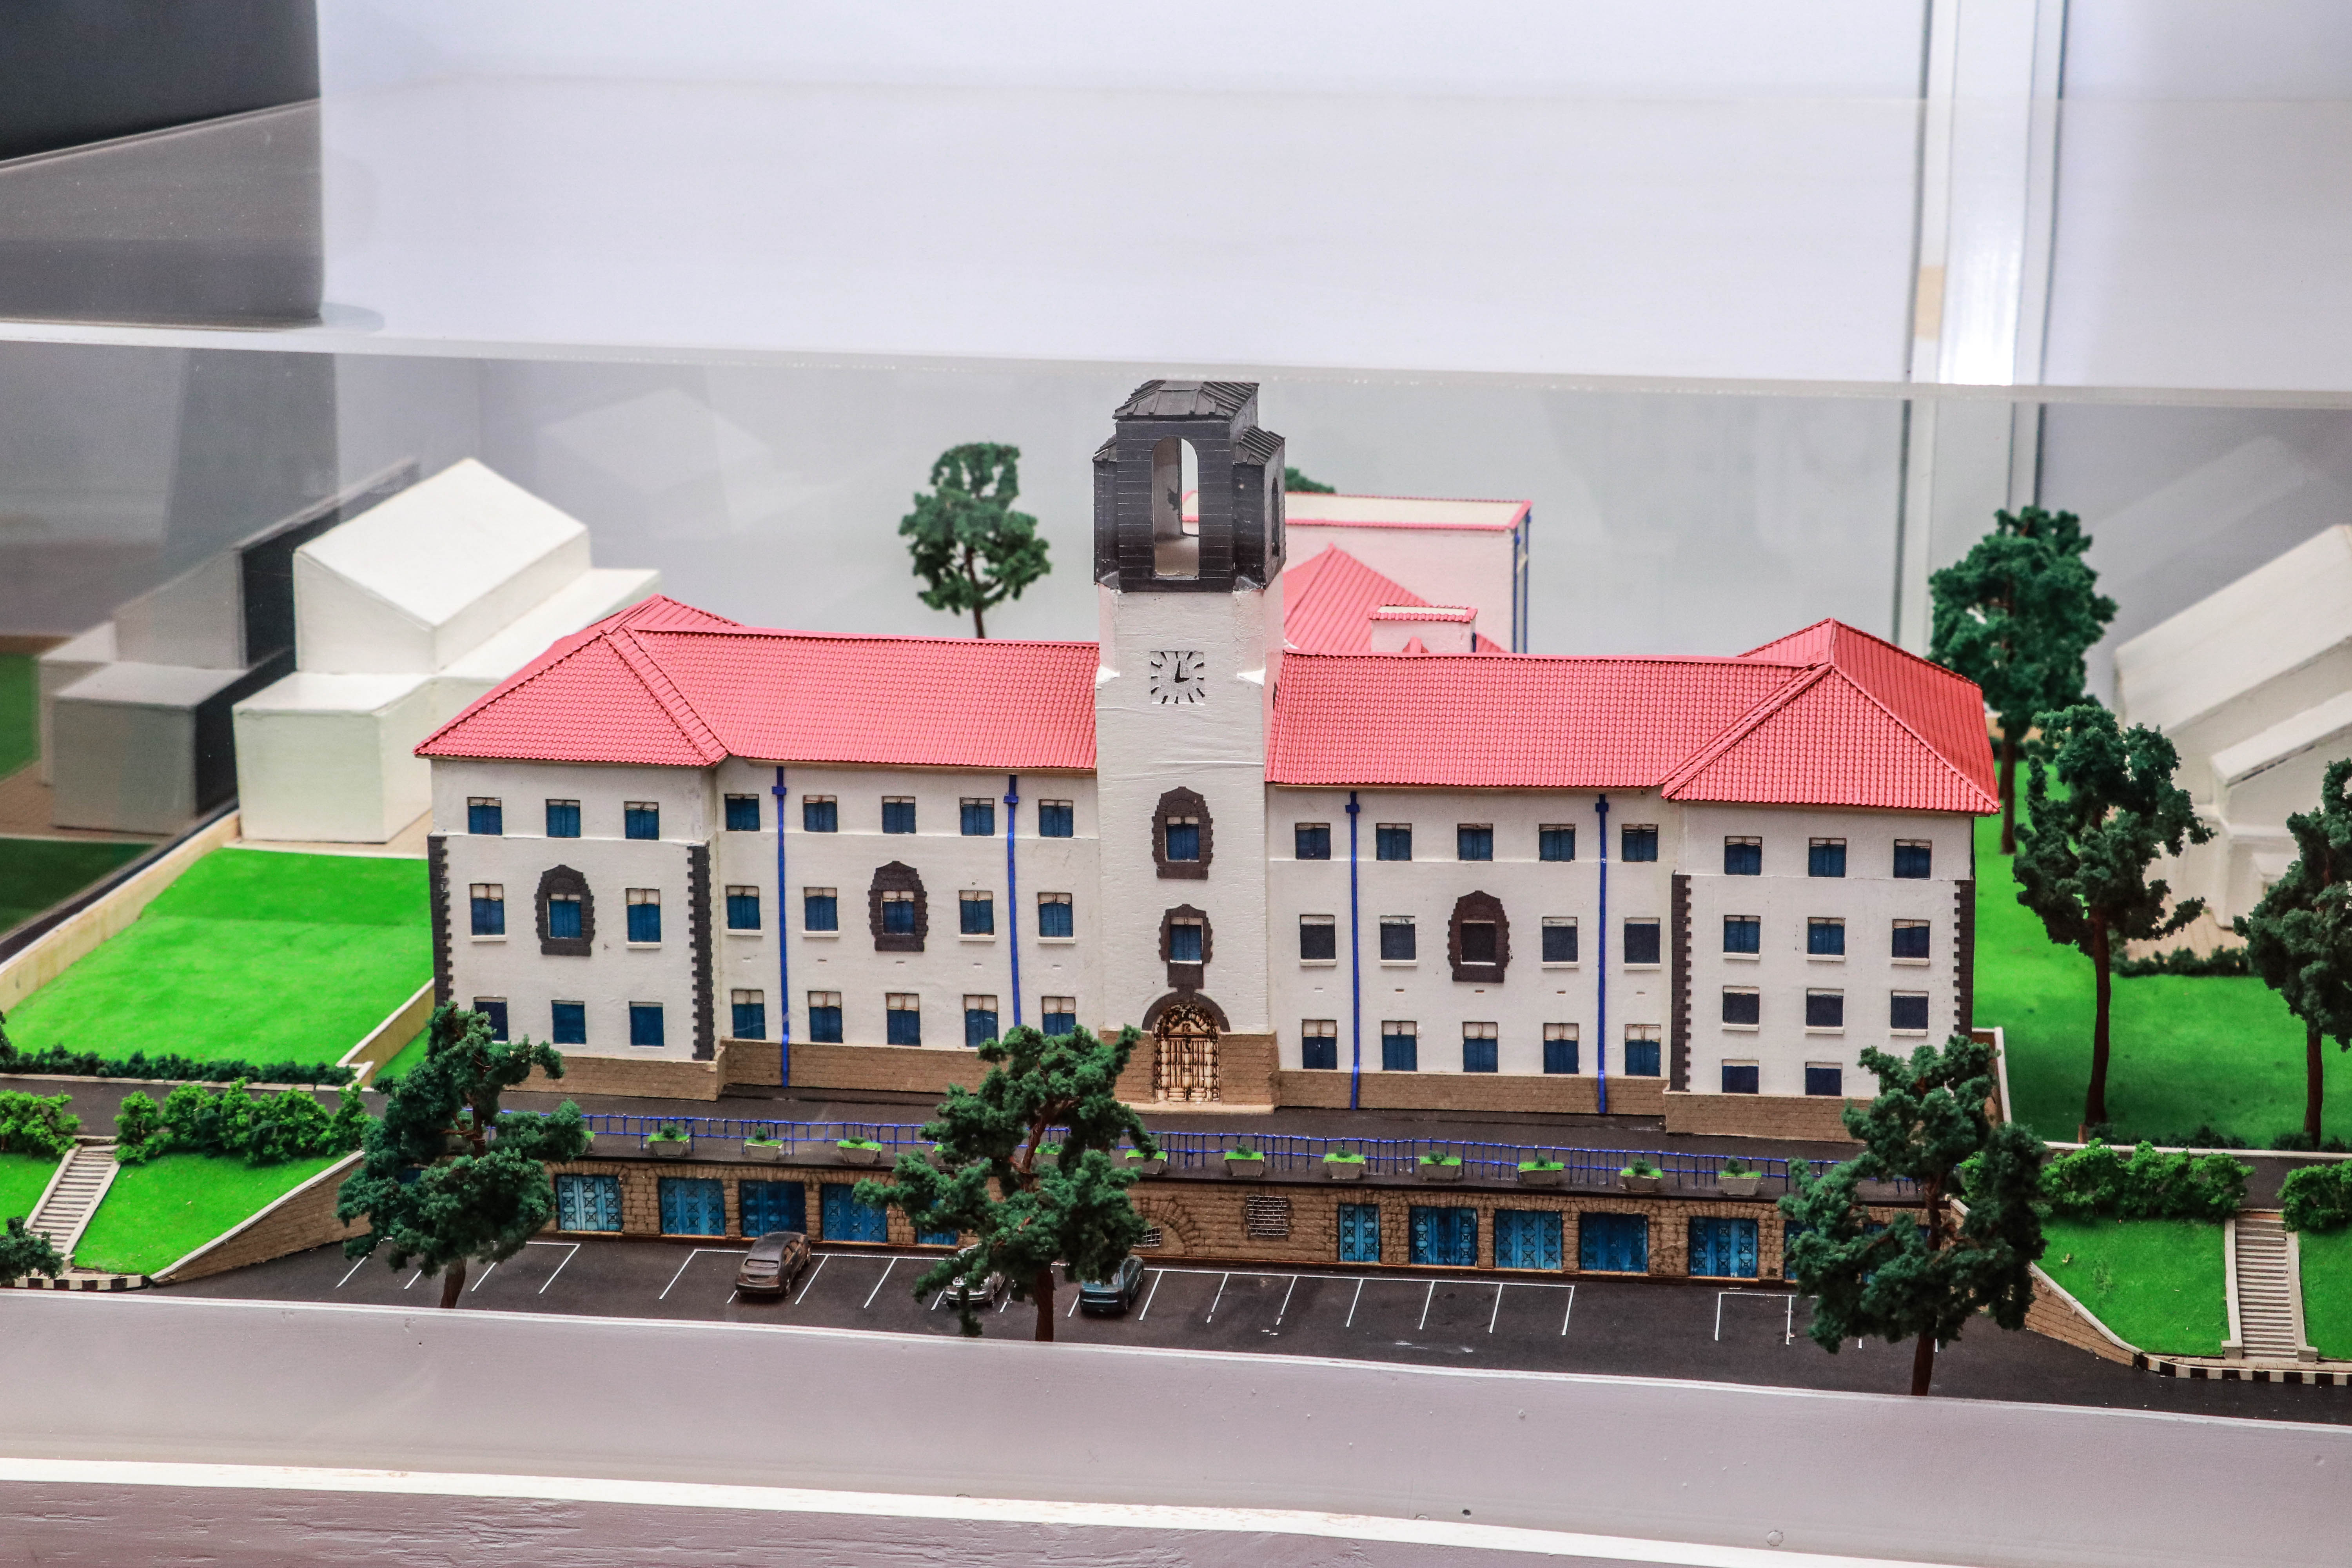 Artistic impression of the Makerere University Main Building and how it will appear once reconstructed.